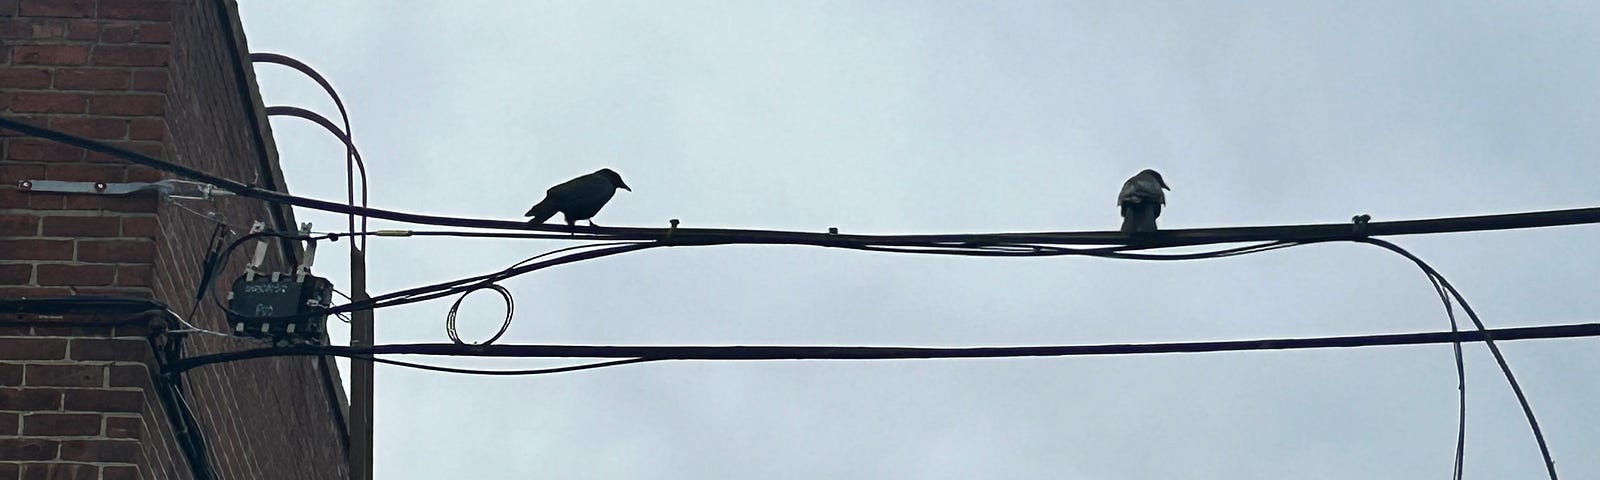 Two crows sitting on an electrical wire.